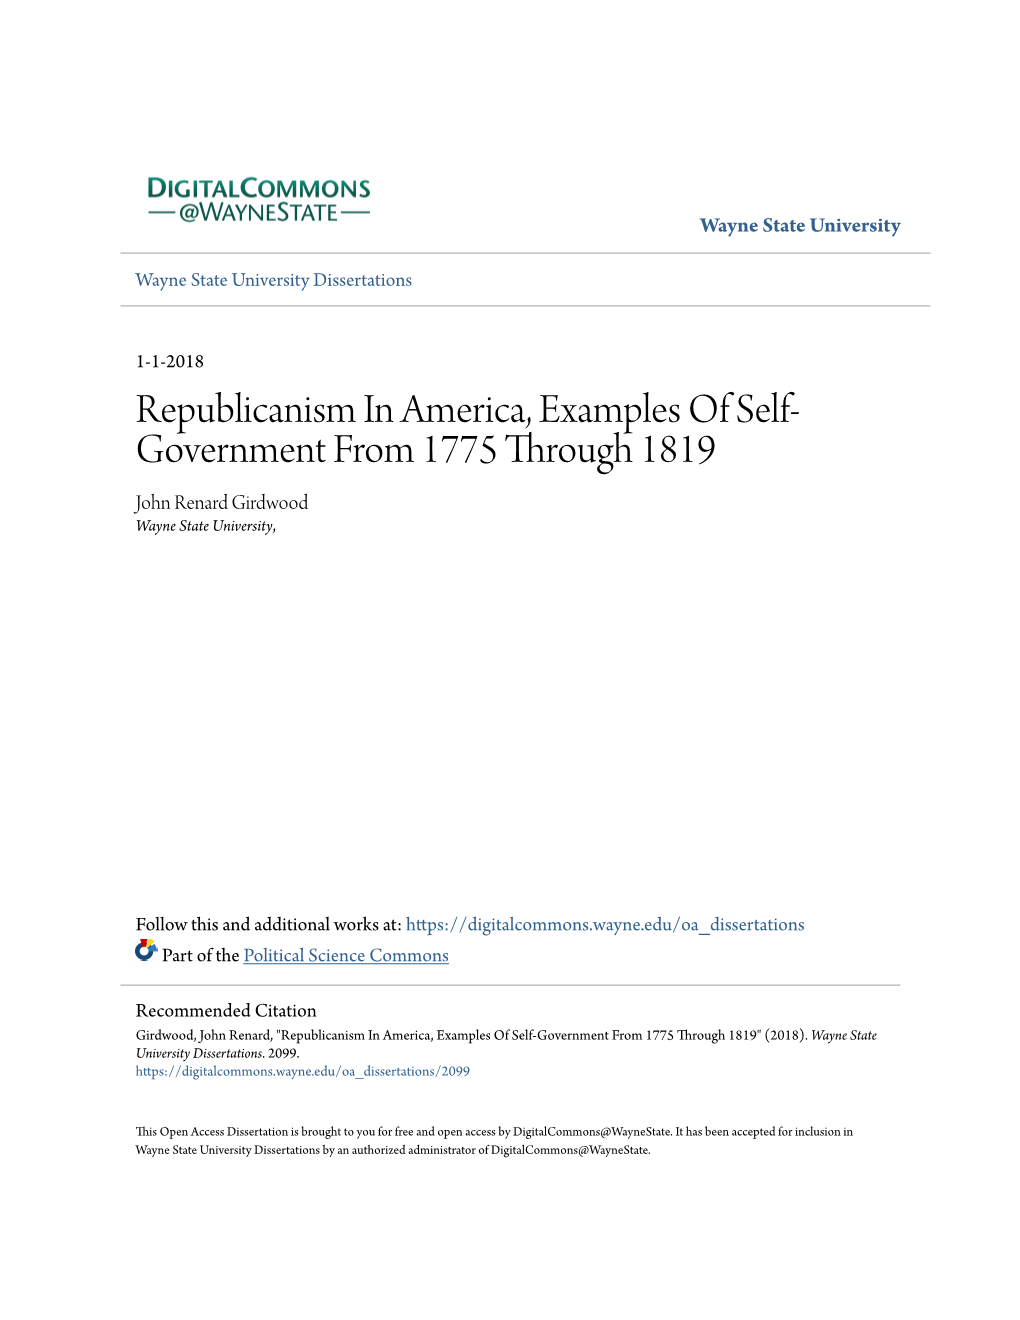 Republicanism in America, Examples of Self-Government from 1775 Through 1819" (2018)